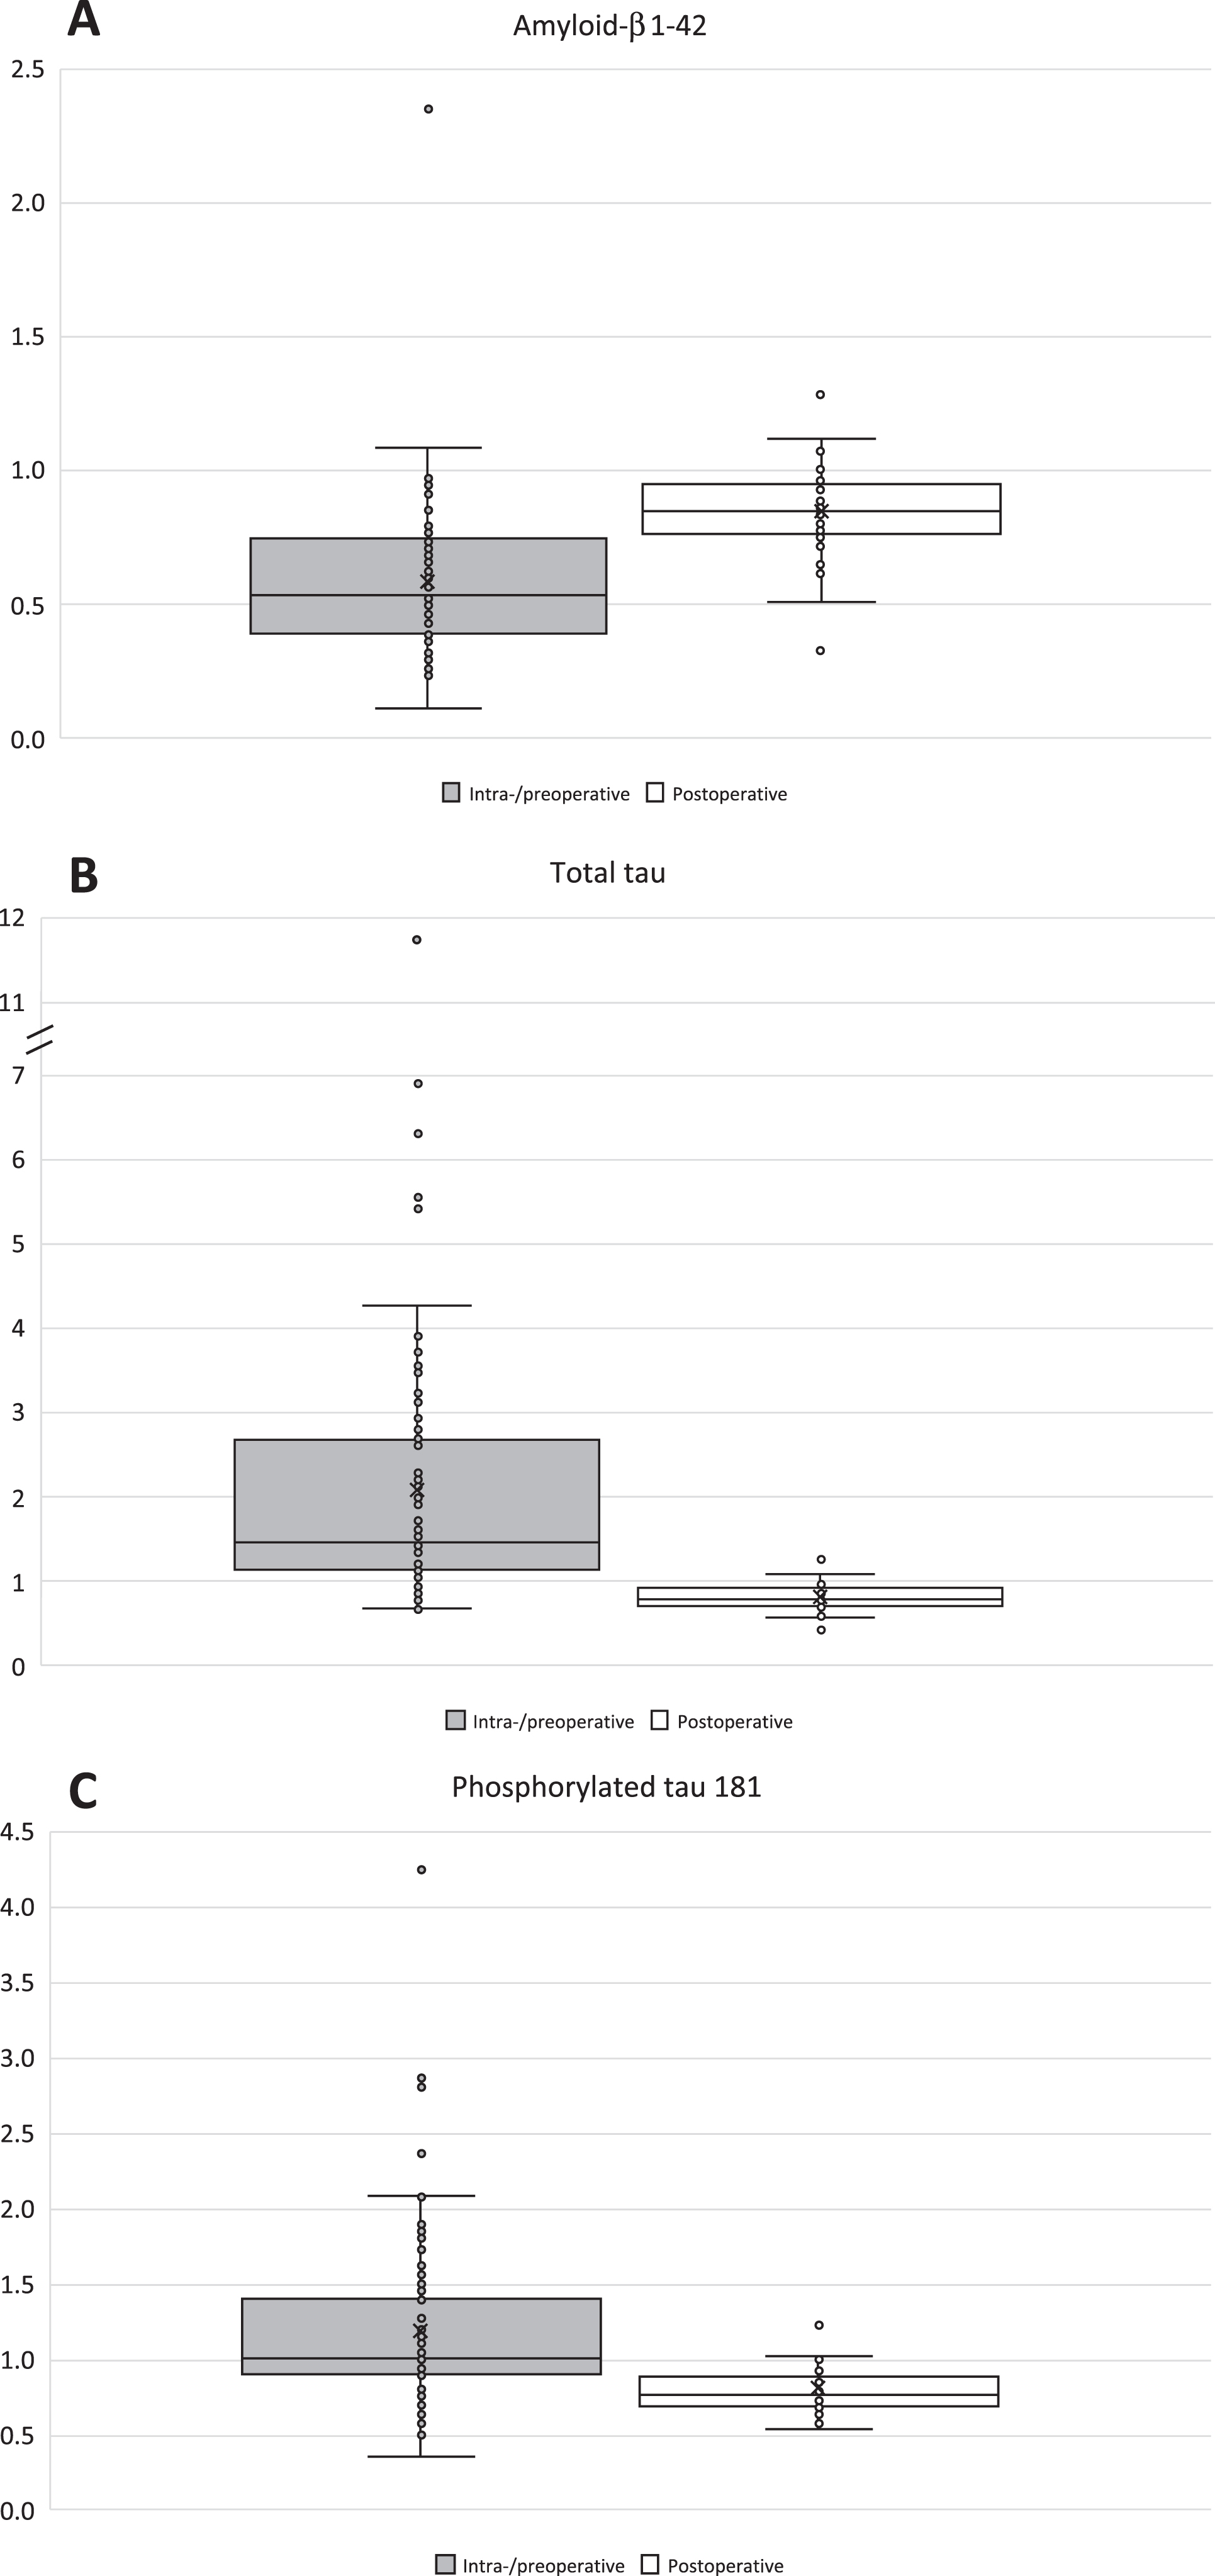 Boxplots of ventricular-/lumbar CSF ratios. Box and whiskers plots are presenting ventricular-/lumbar CSF ratios of the biomarkers of Aβ42 (A), T-tau (B), and P-tau181 (C). Light gray boxplots are illustrating the ratios of intraoperative V-CSF and preoperative L-CSF. White boxplots are presenting the ratios of postoperative V- and L-CSF. Repeated V- and L-CSF samples of the follow-up were pooled per patient before the calculation of the V-/L-CSF ratios. Aβ42, amyloid-β 1-42; T-tau, total tau protein; P-tau181, phosphorylated tau at threonine 181; V-CSF, ventricular cerebrospinal fluid; L-CSF, lumbar cerebrospinal fluid.